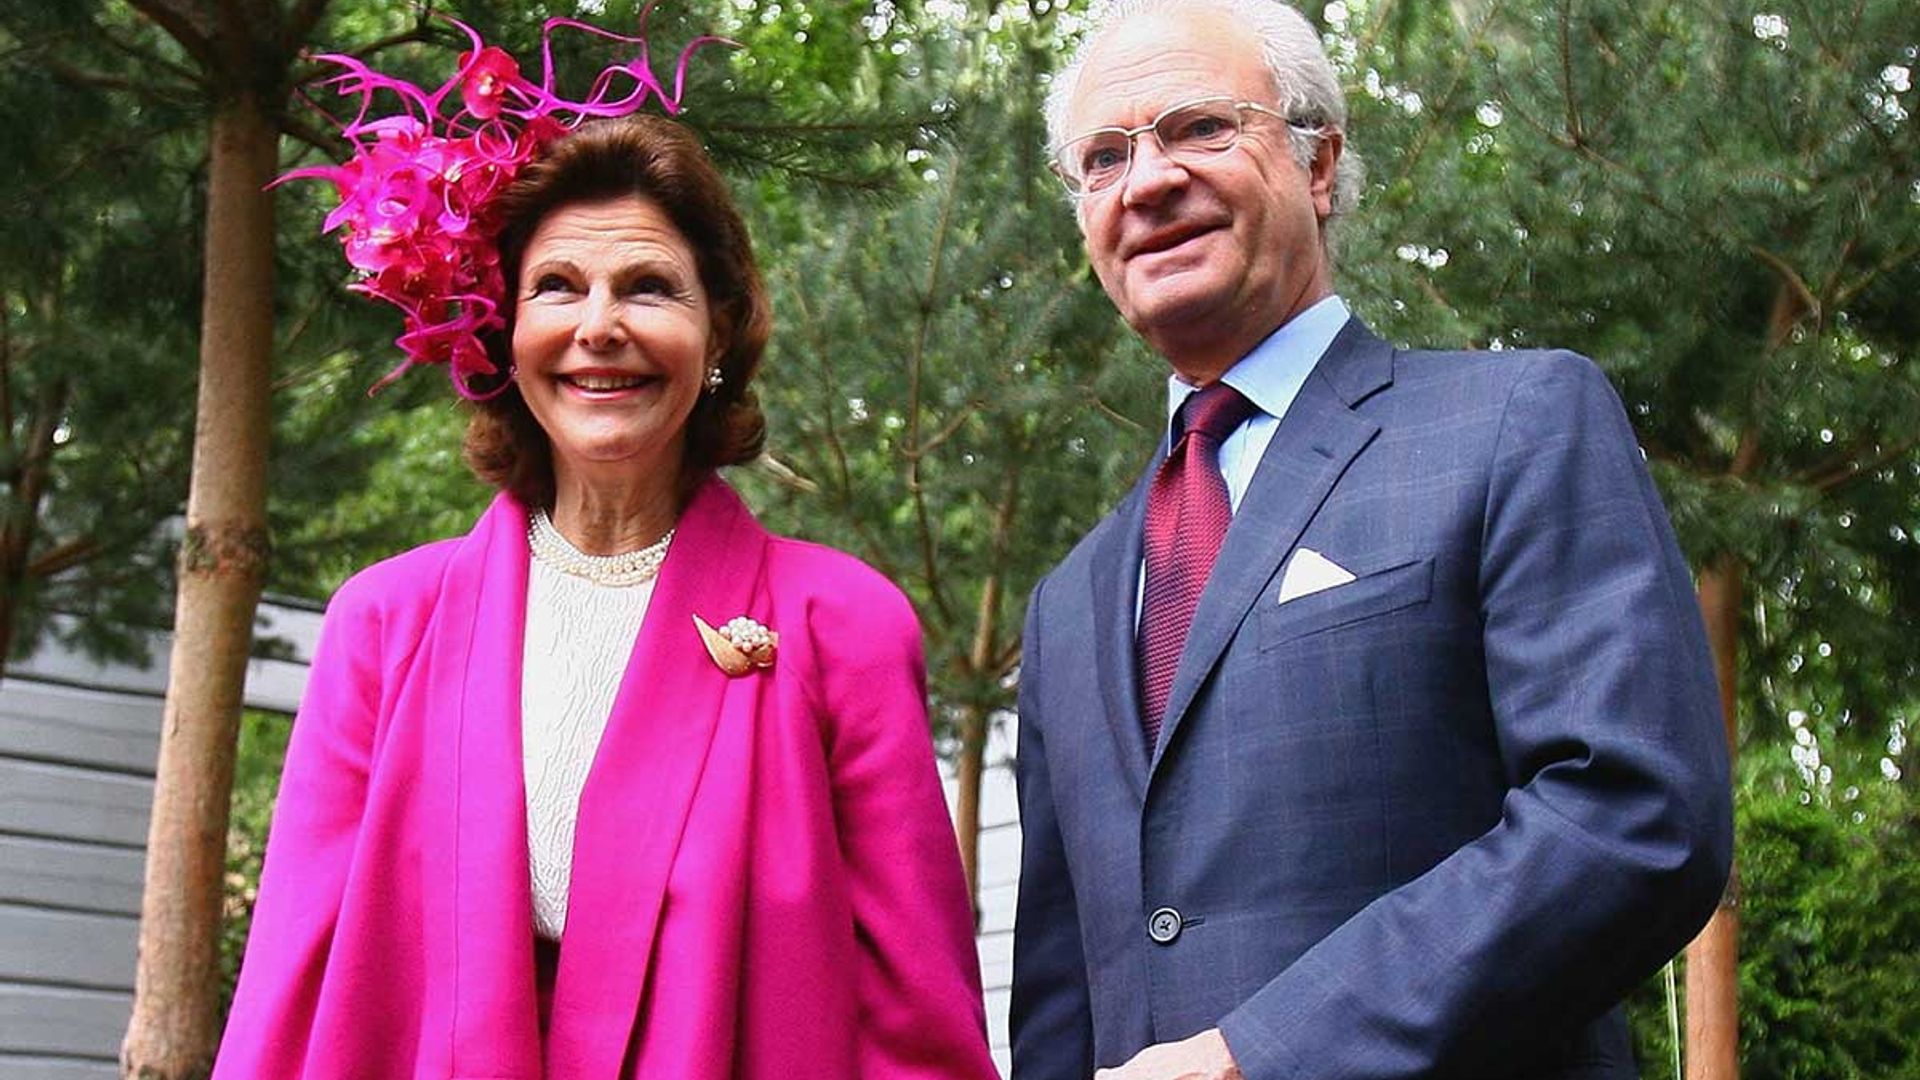 King Carl XVI Gustaf and Queen Silvia of Sweden show off beautiful large garden in country home